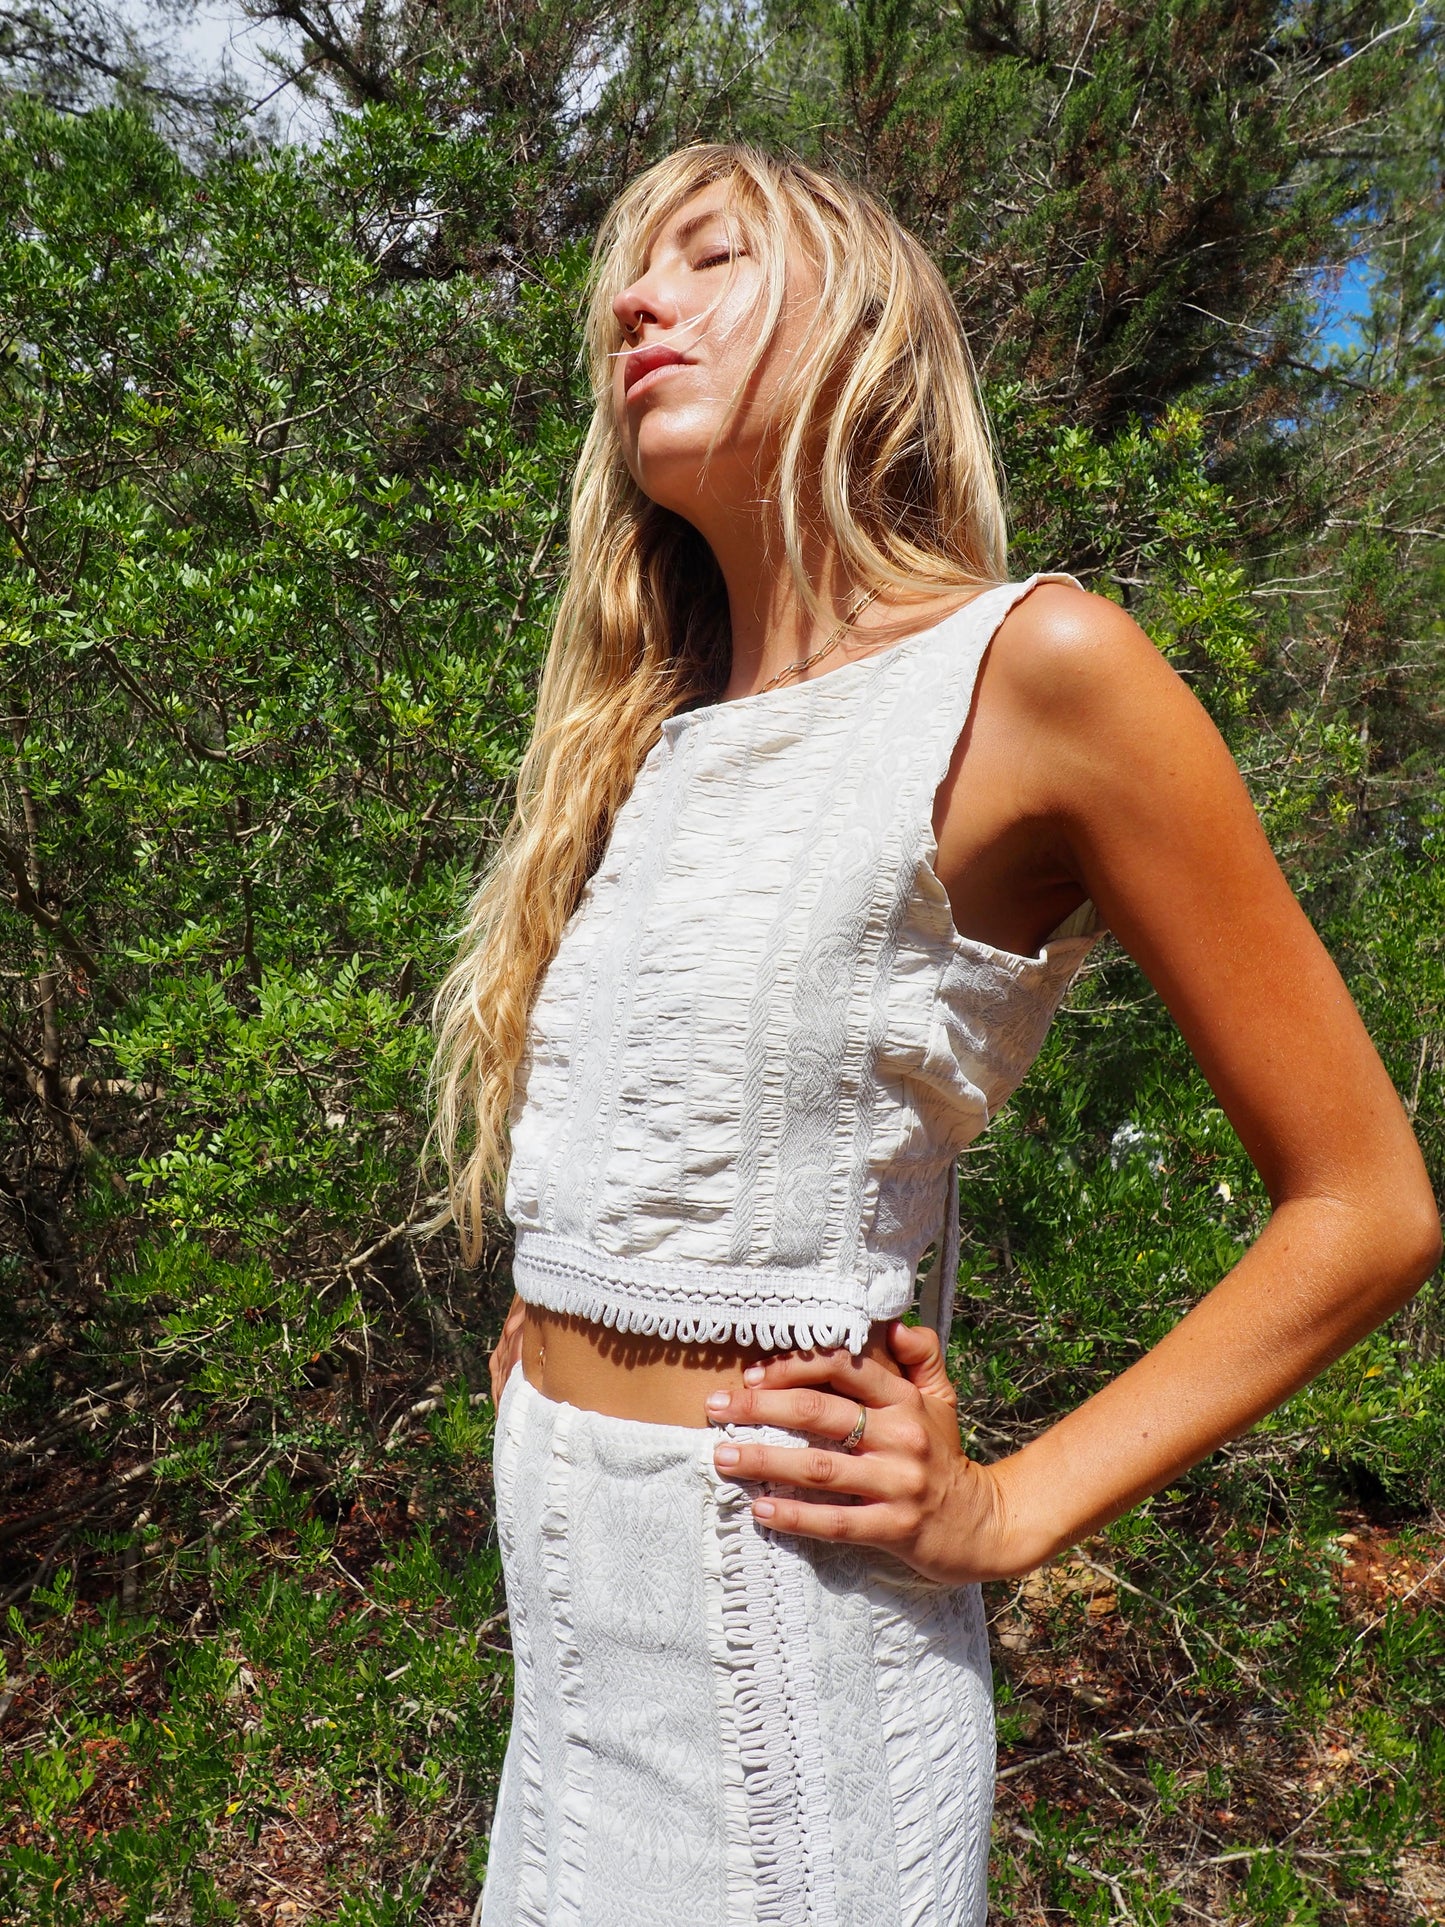 Up-cycled heavy cream and gray cotton woven textile reversible crop top for 2 different styles made by Vagabond Ibiza